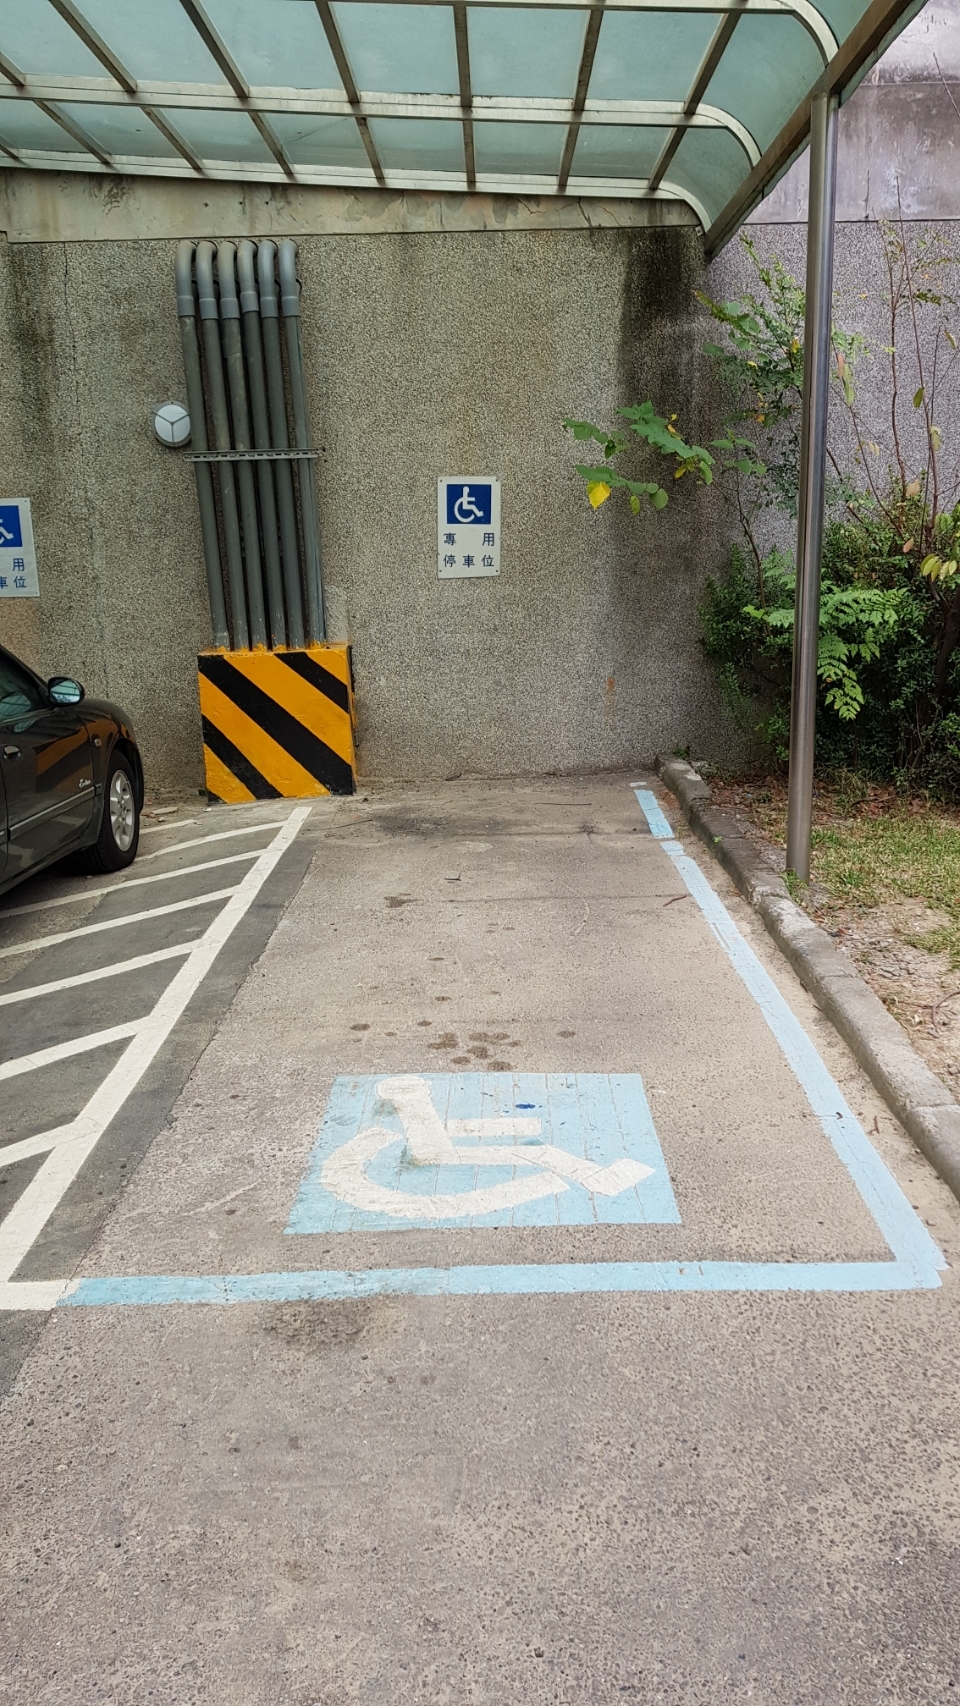 Accessible parking spaces 5